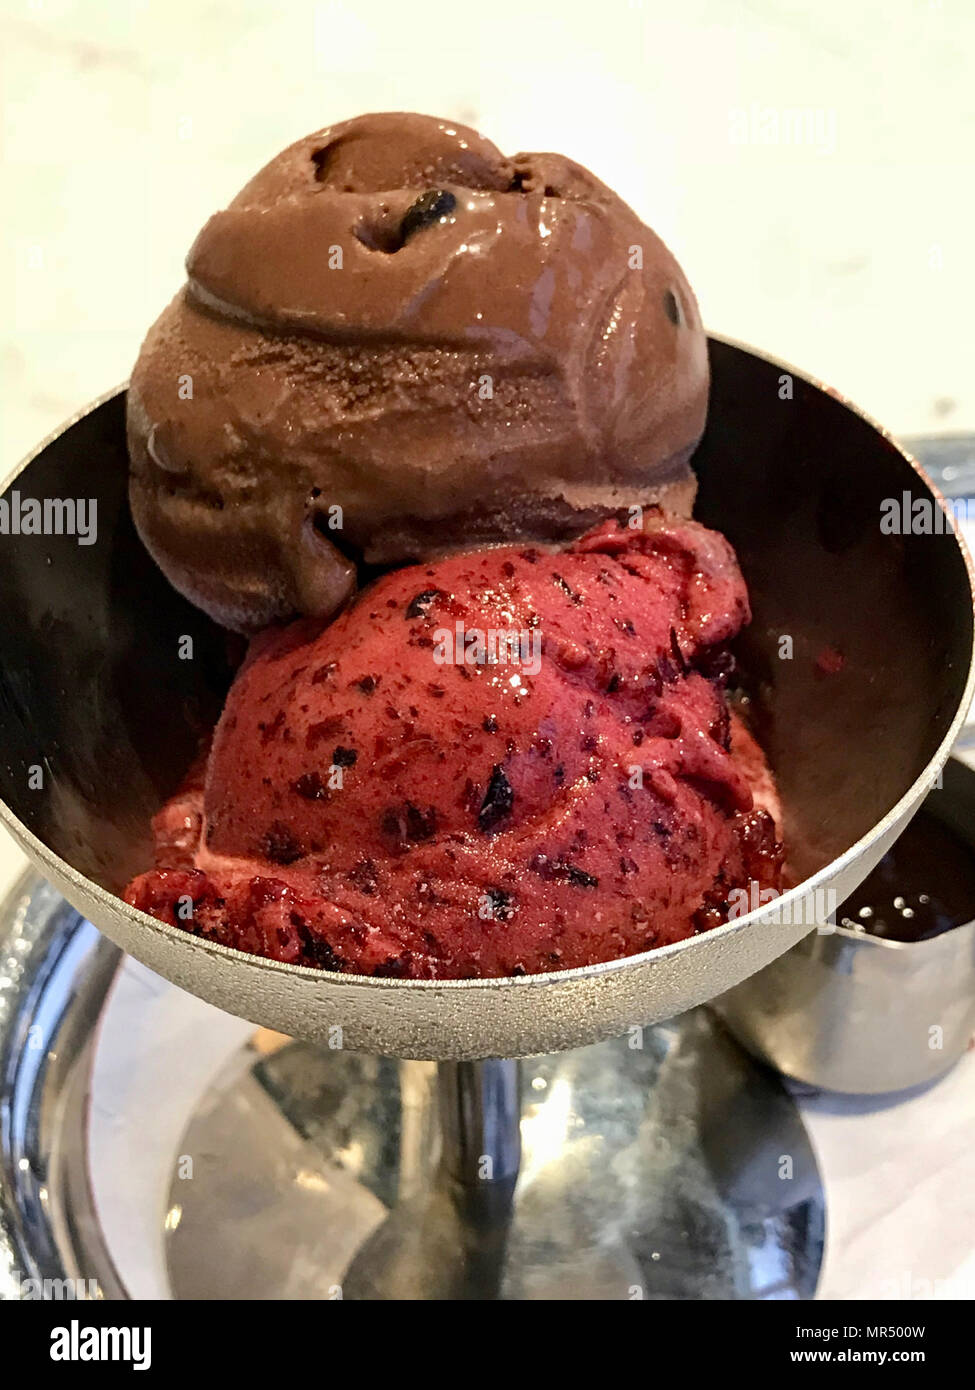 Chocolate and Cherry Ice Cream in Vintage Metal Bowl with Silver Tray. Organic Summer Dessert. Stock Photo